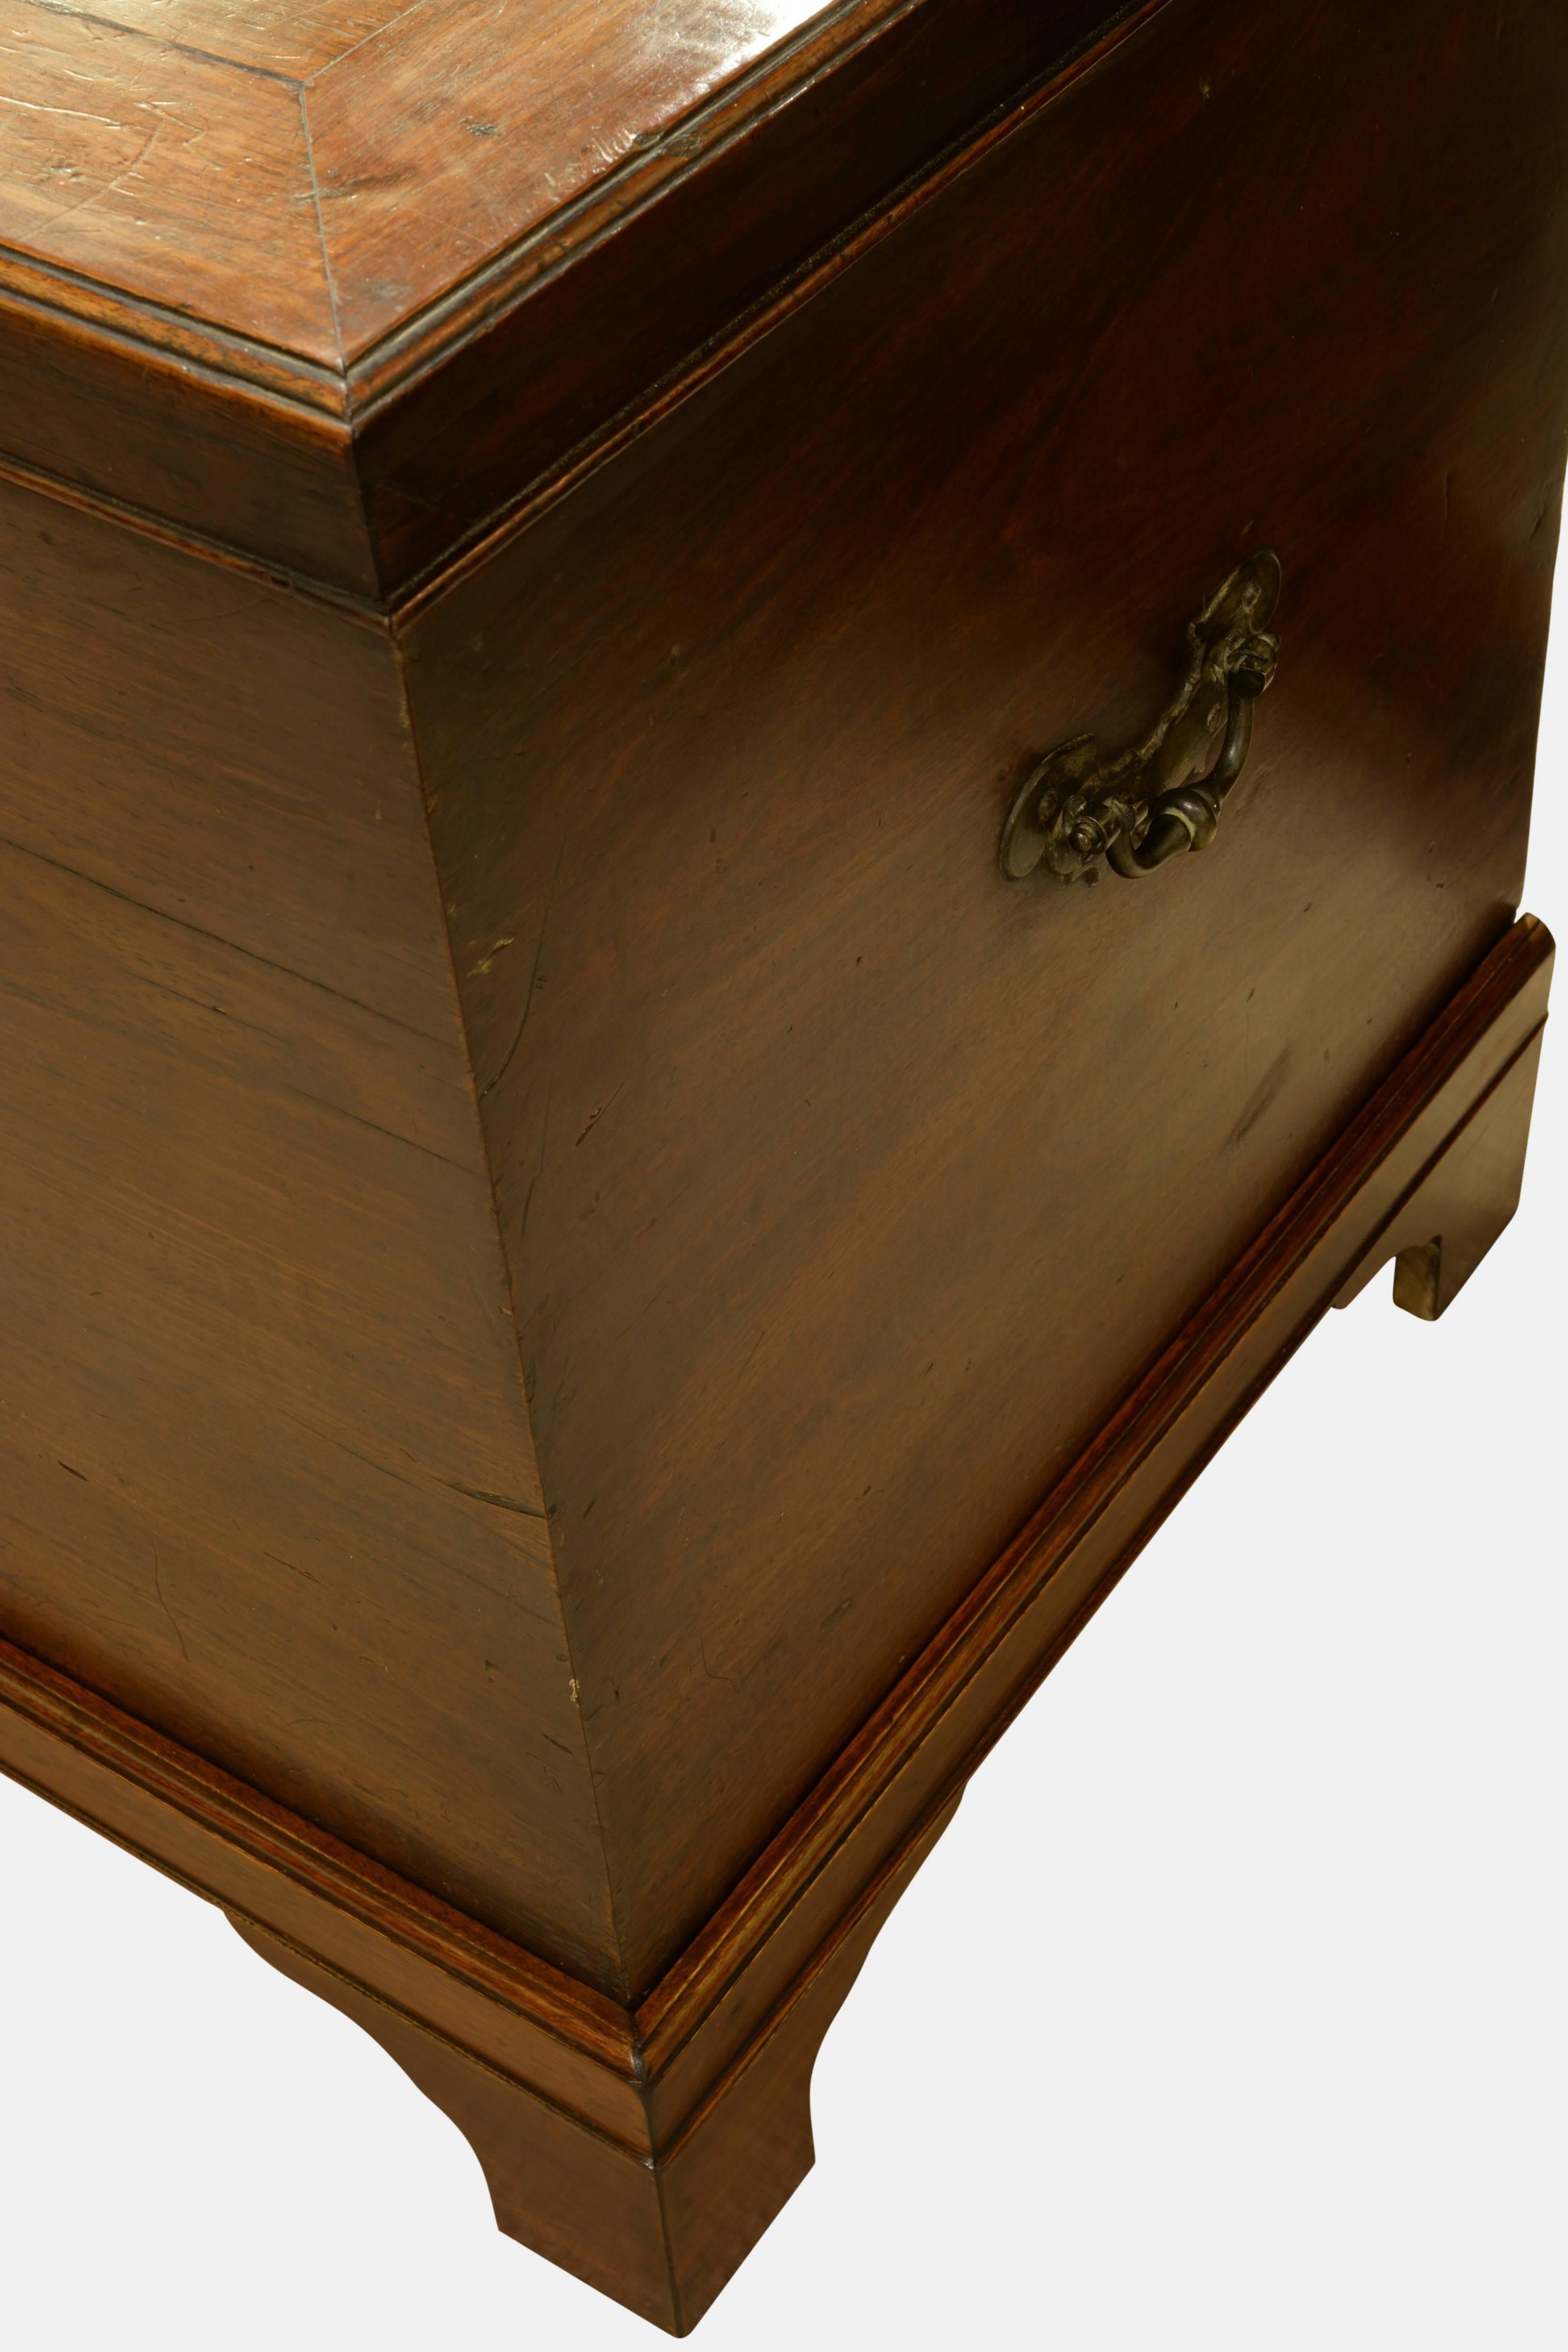 Chippendale Period Mahogany Chest 1